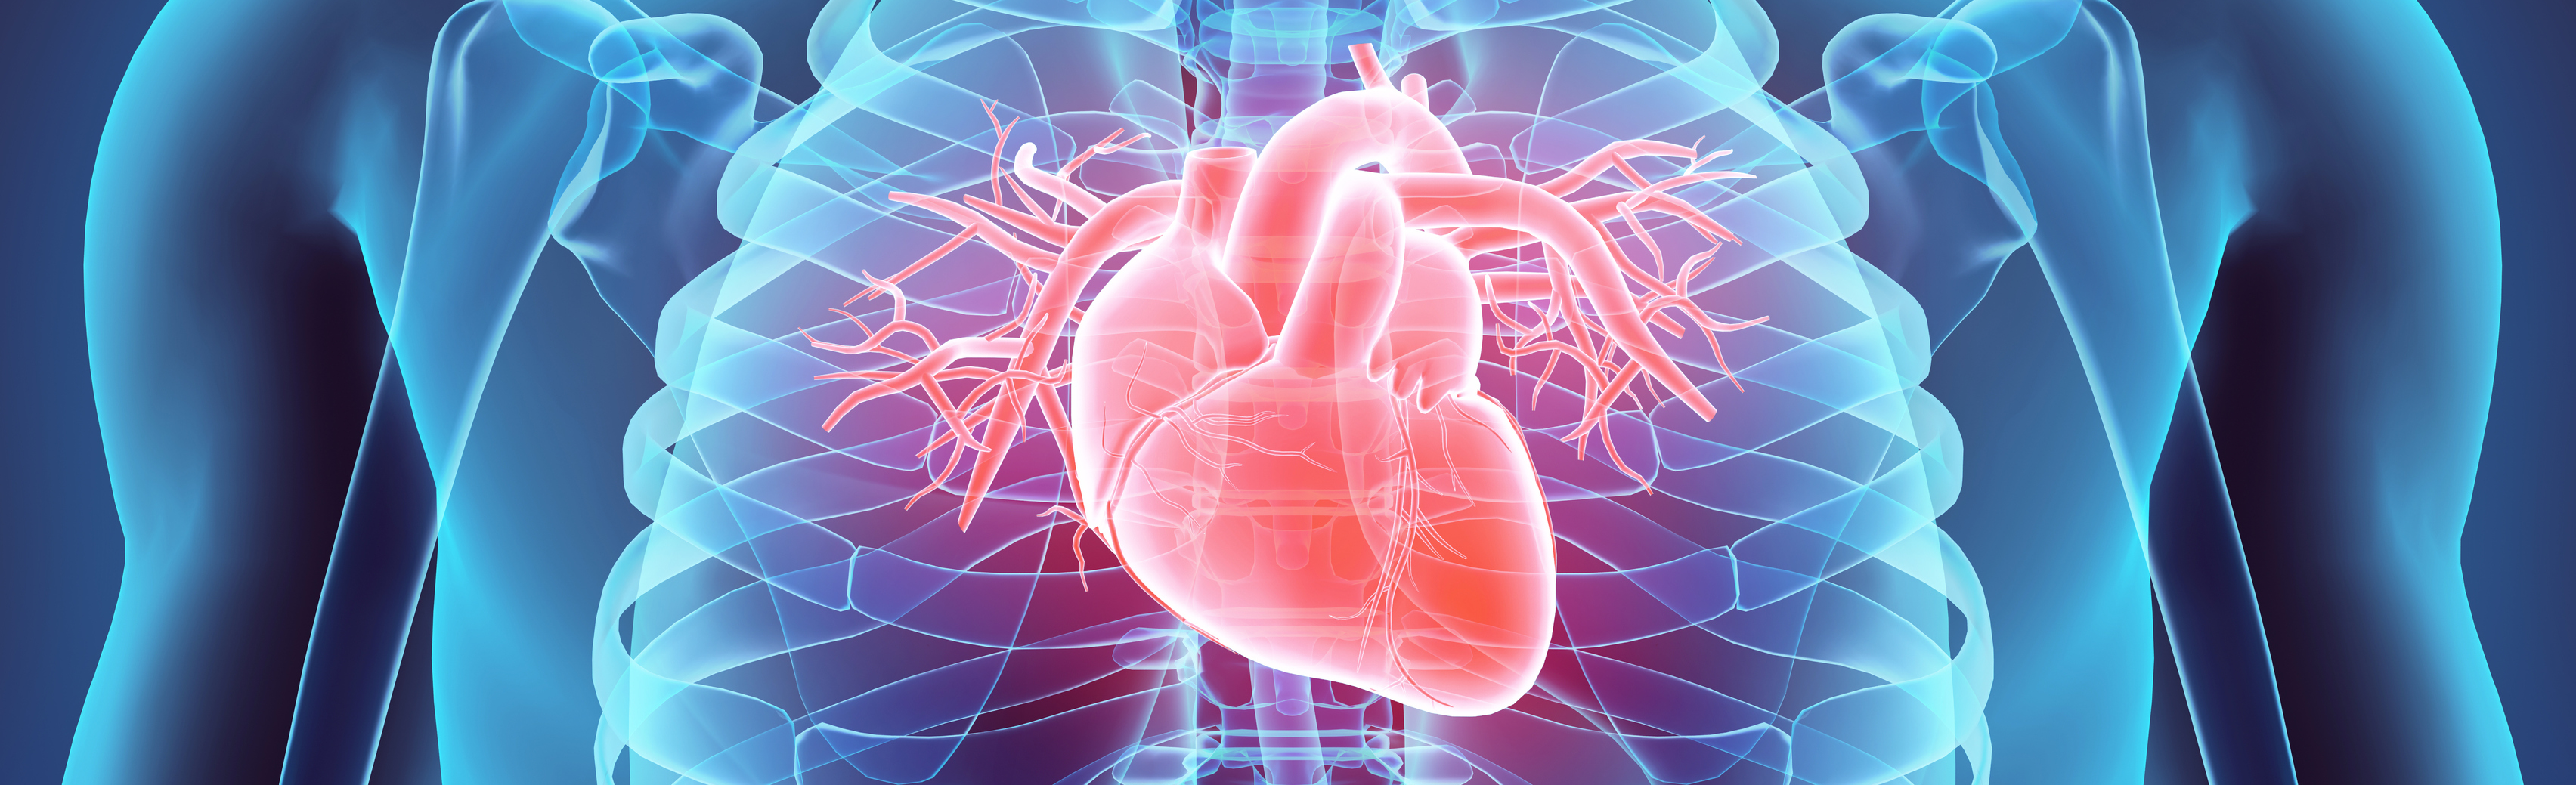 Case Study Research Emphasizes Importance of Specific Imaging in Cardiac Surgical Care | University of Colorado Department of Surgery